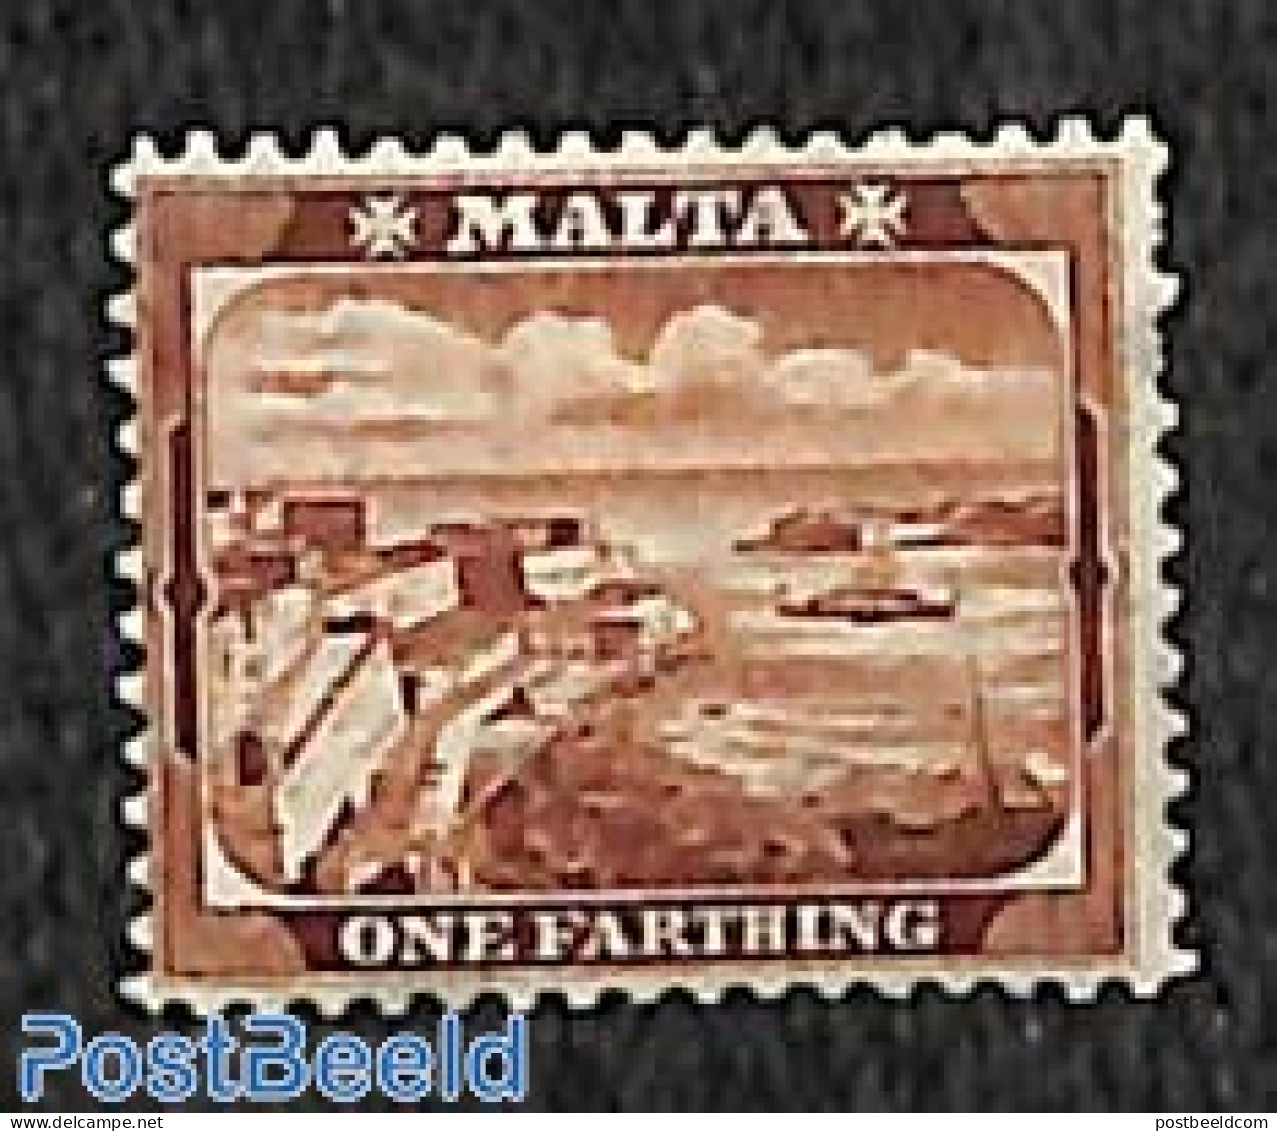 Malta 1904 1/4p Redbrown, Stamp Out Of Set, Unused (hinged), Transport - Ships And Boats - Boten